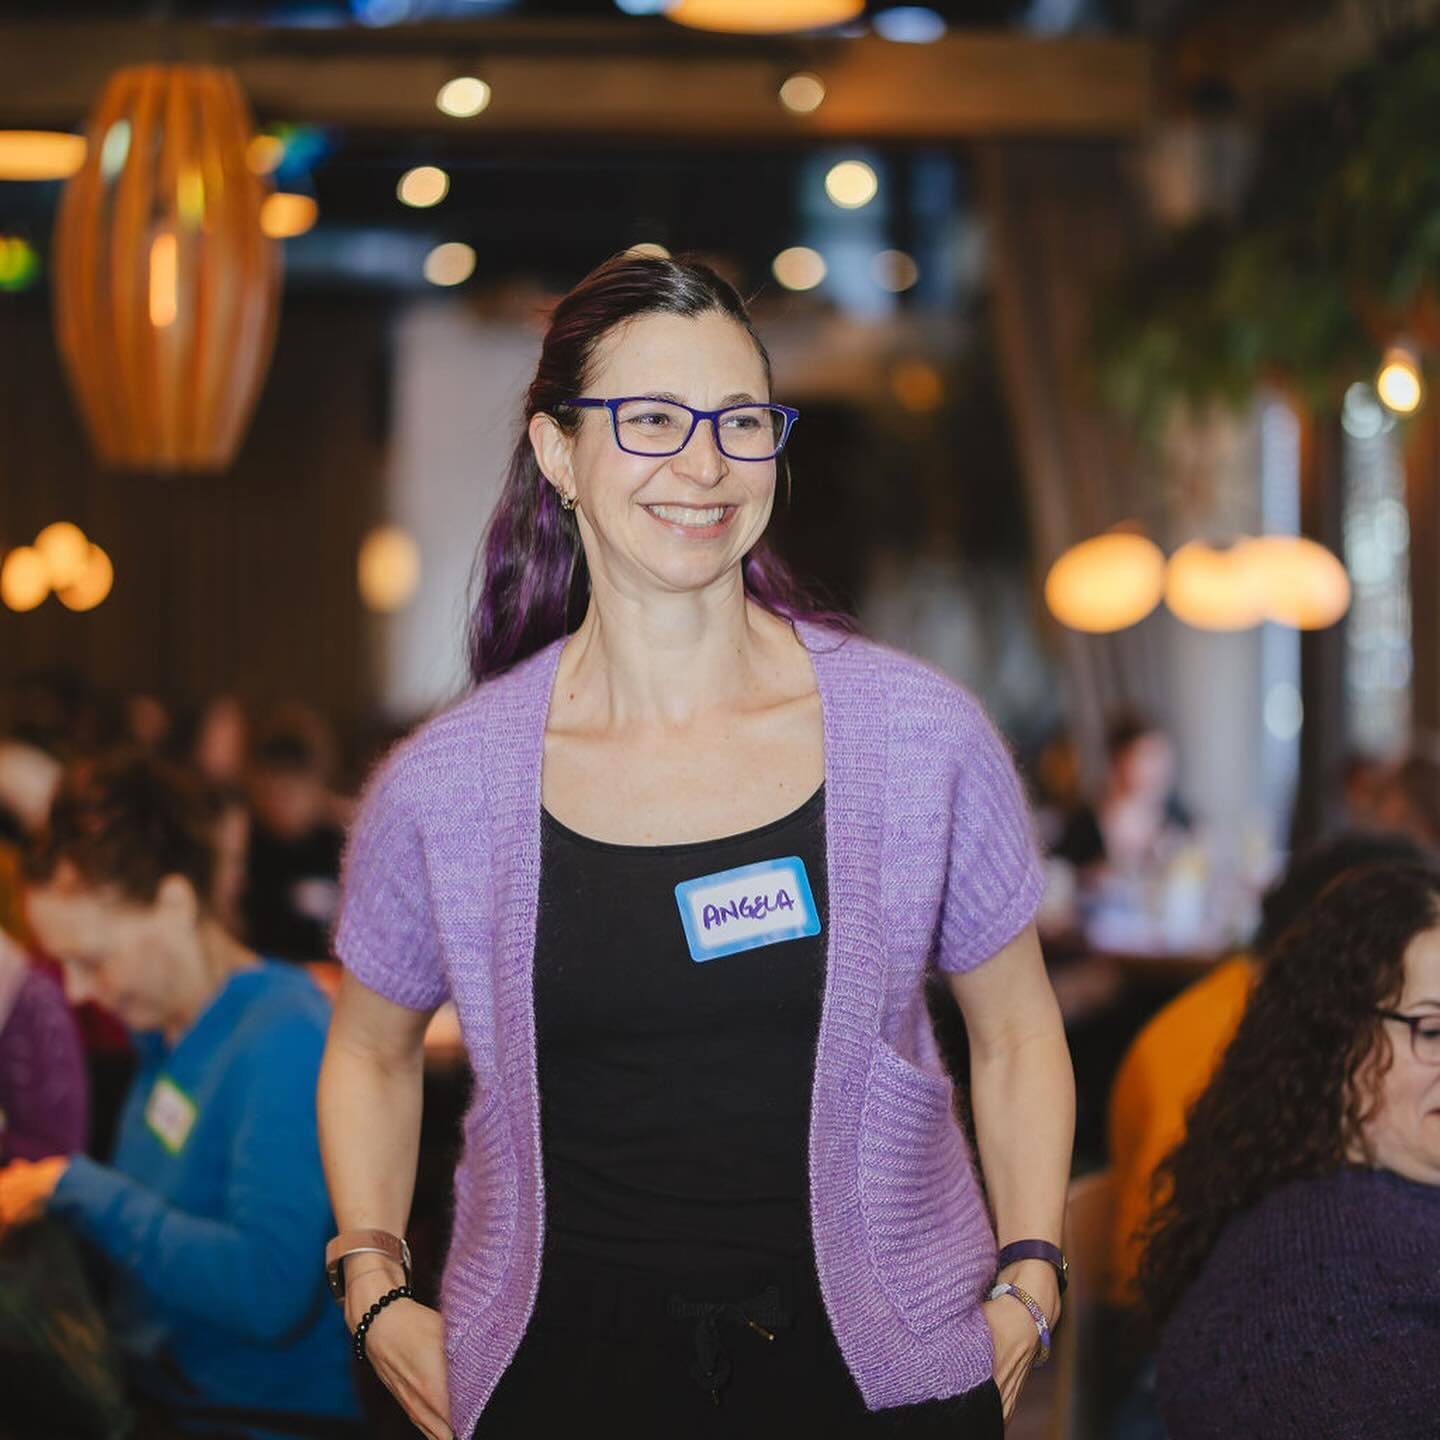 Shout out to this amazing woman @angelaboswell who joined us this year at Stitch Up Chicago to lead several stitcher stretch breaks. It was so great to see all the attendees getting in some movement and stretching between workshops.

This was definit